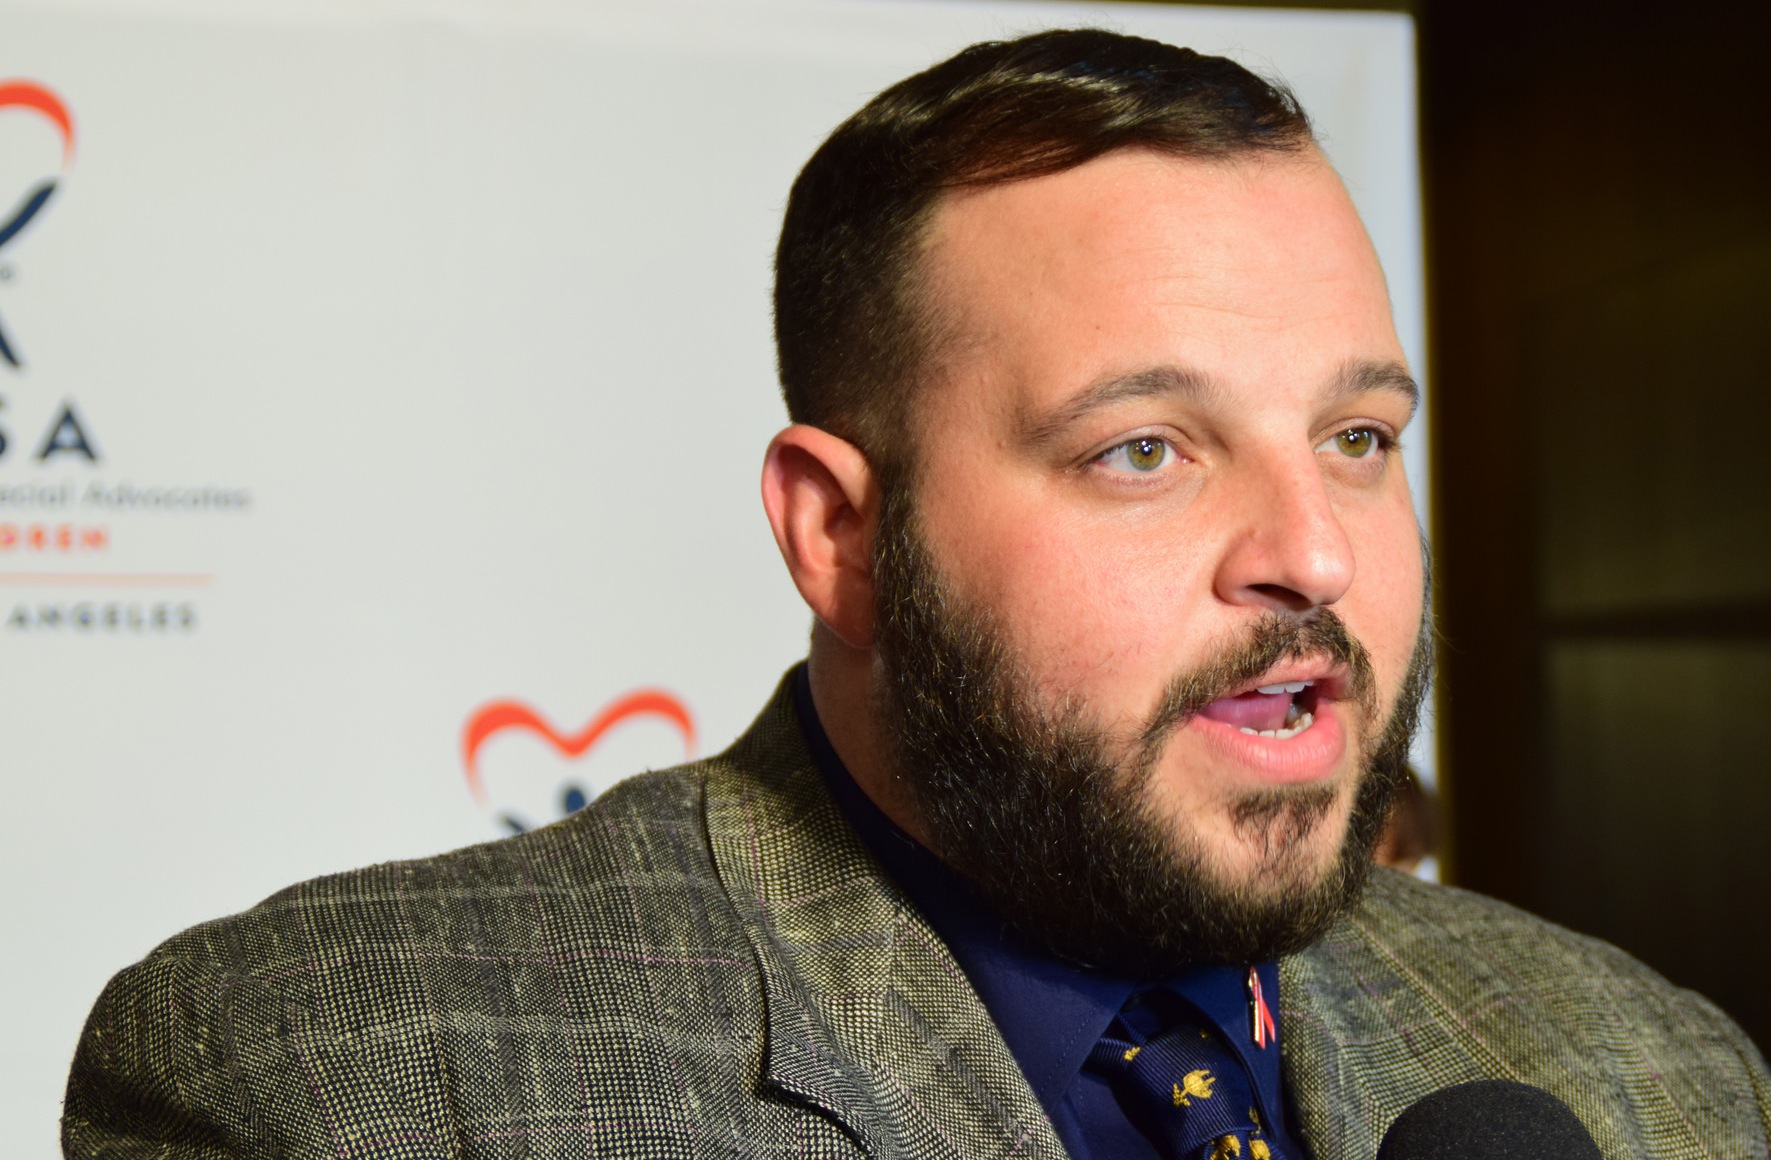 Mean Girls star Daniel Franzese speaks out about homophobic abuse and body-shaming